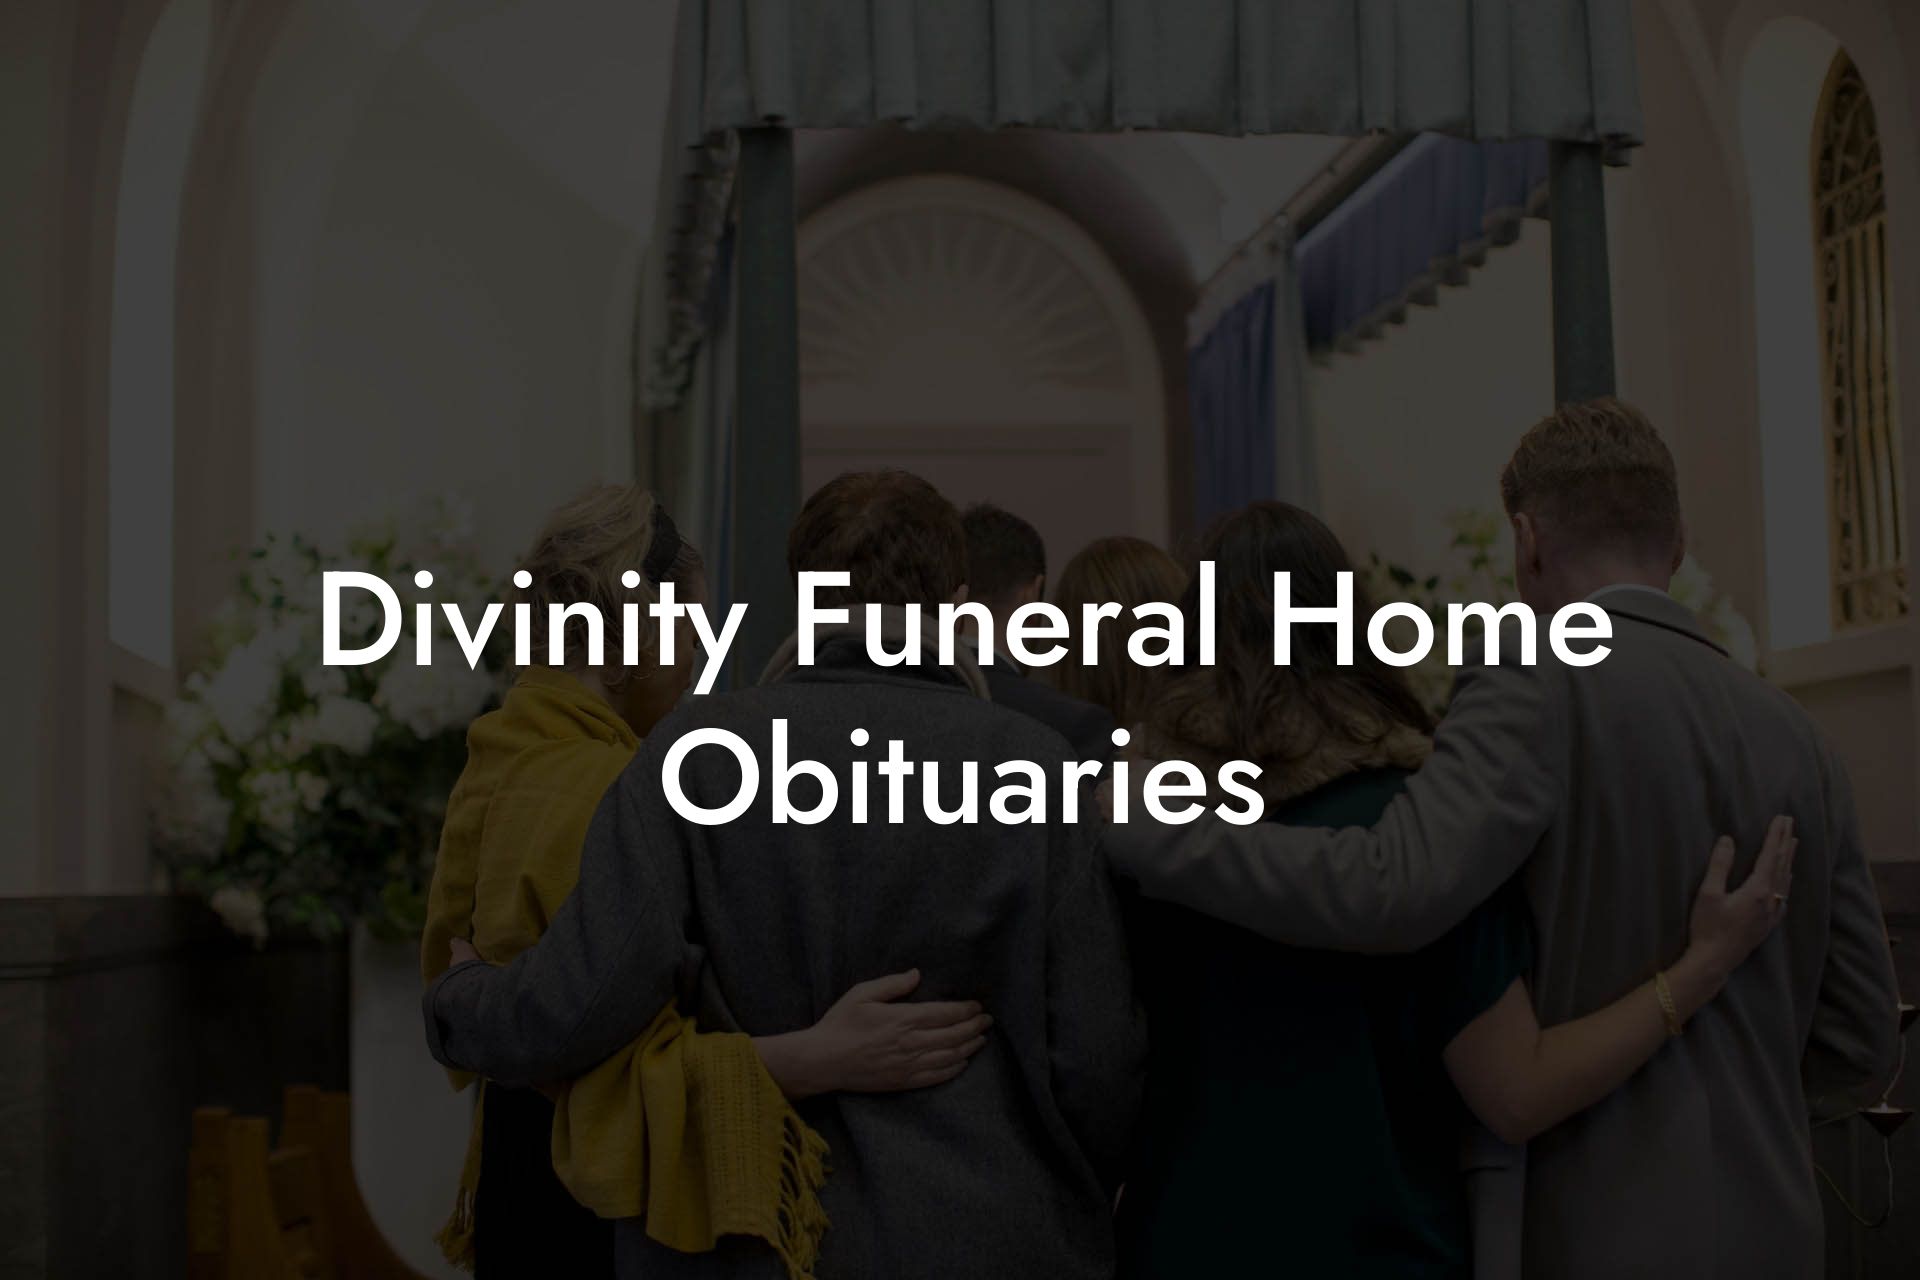 Divinity Funeral Home Obituaries